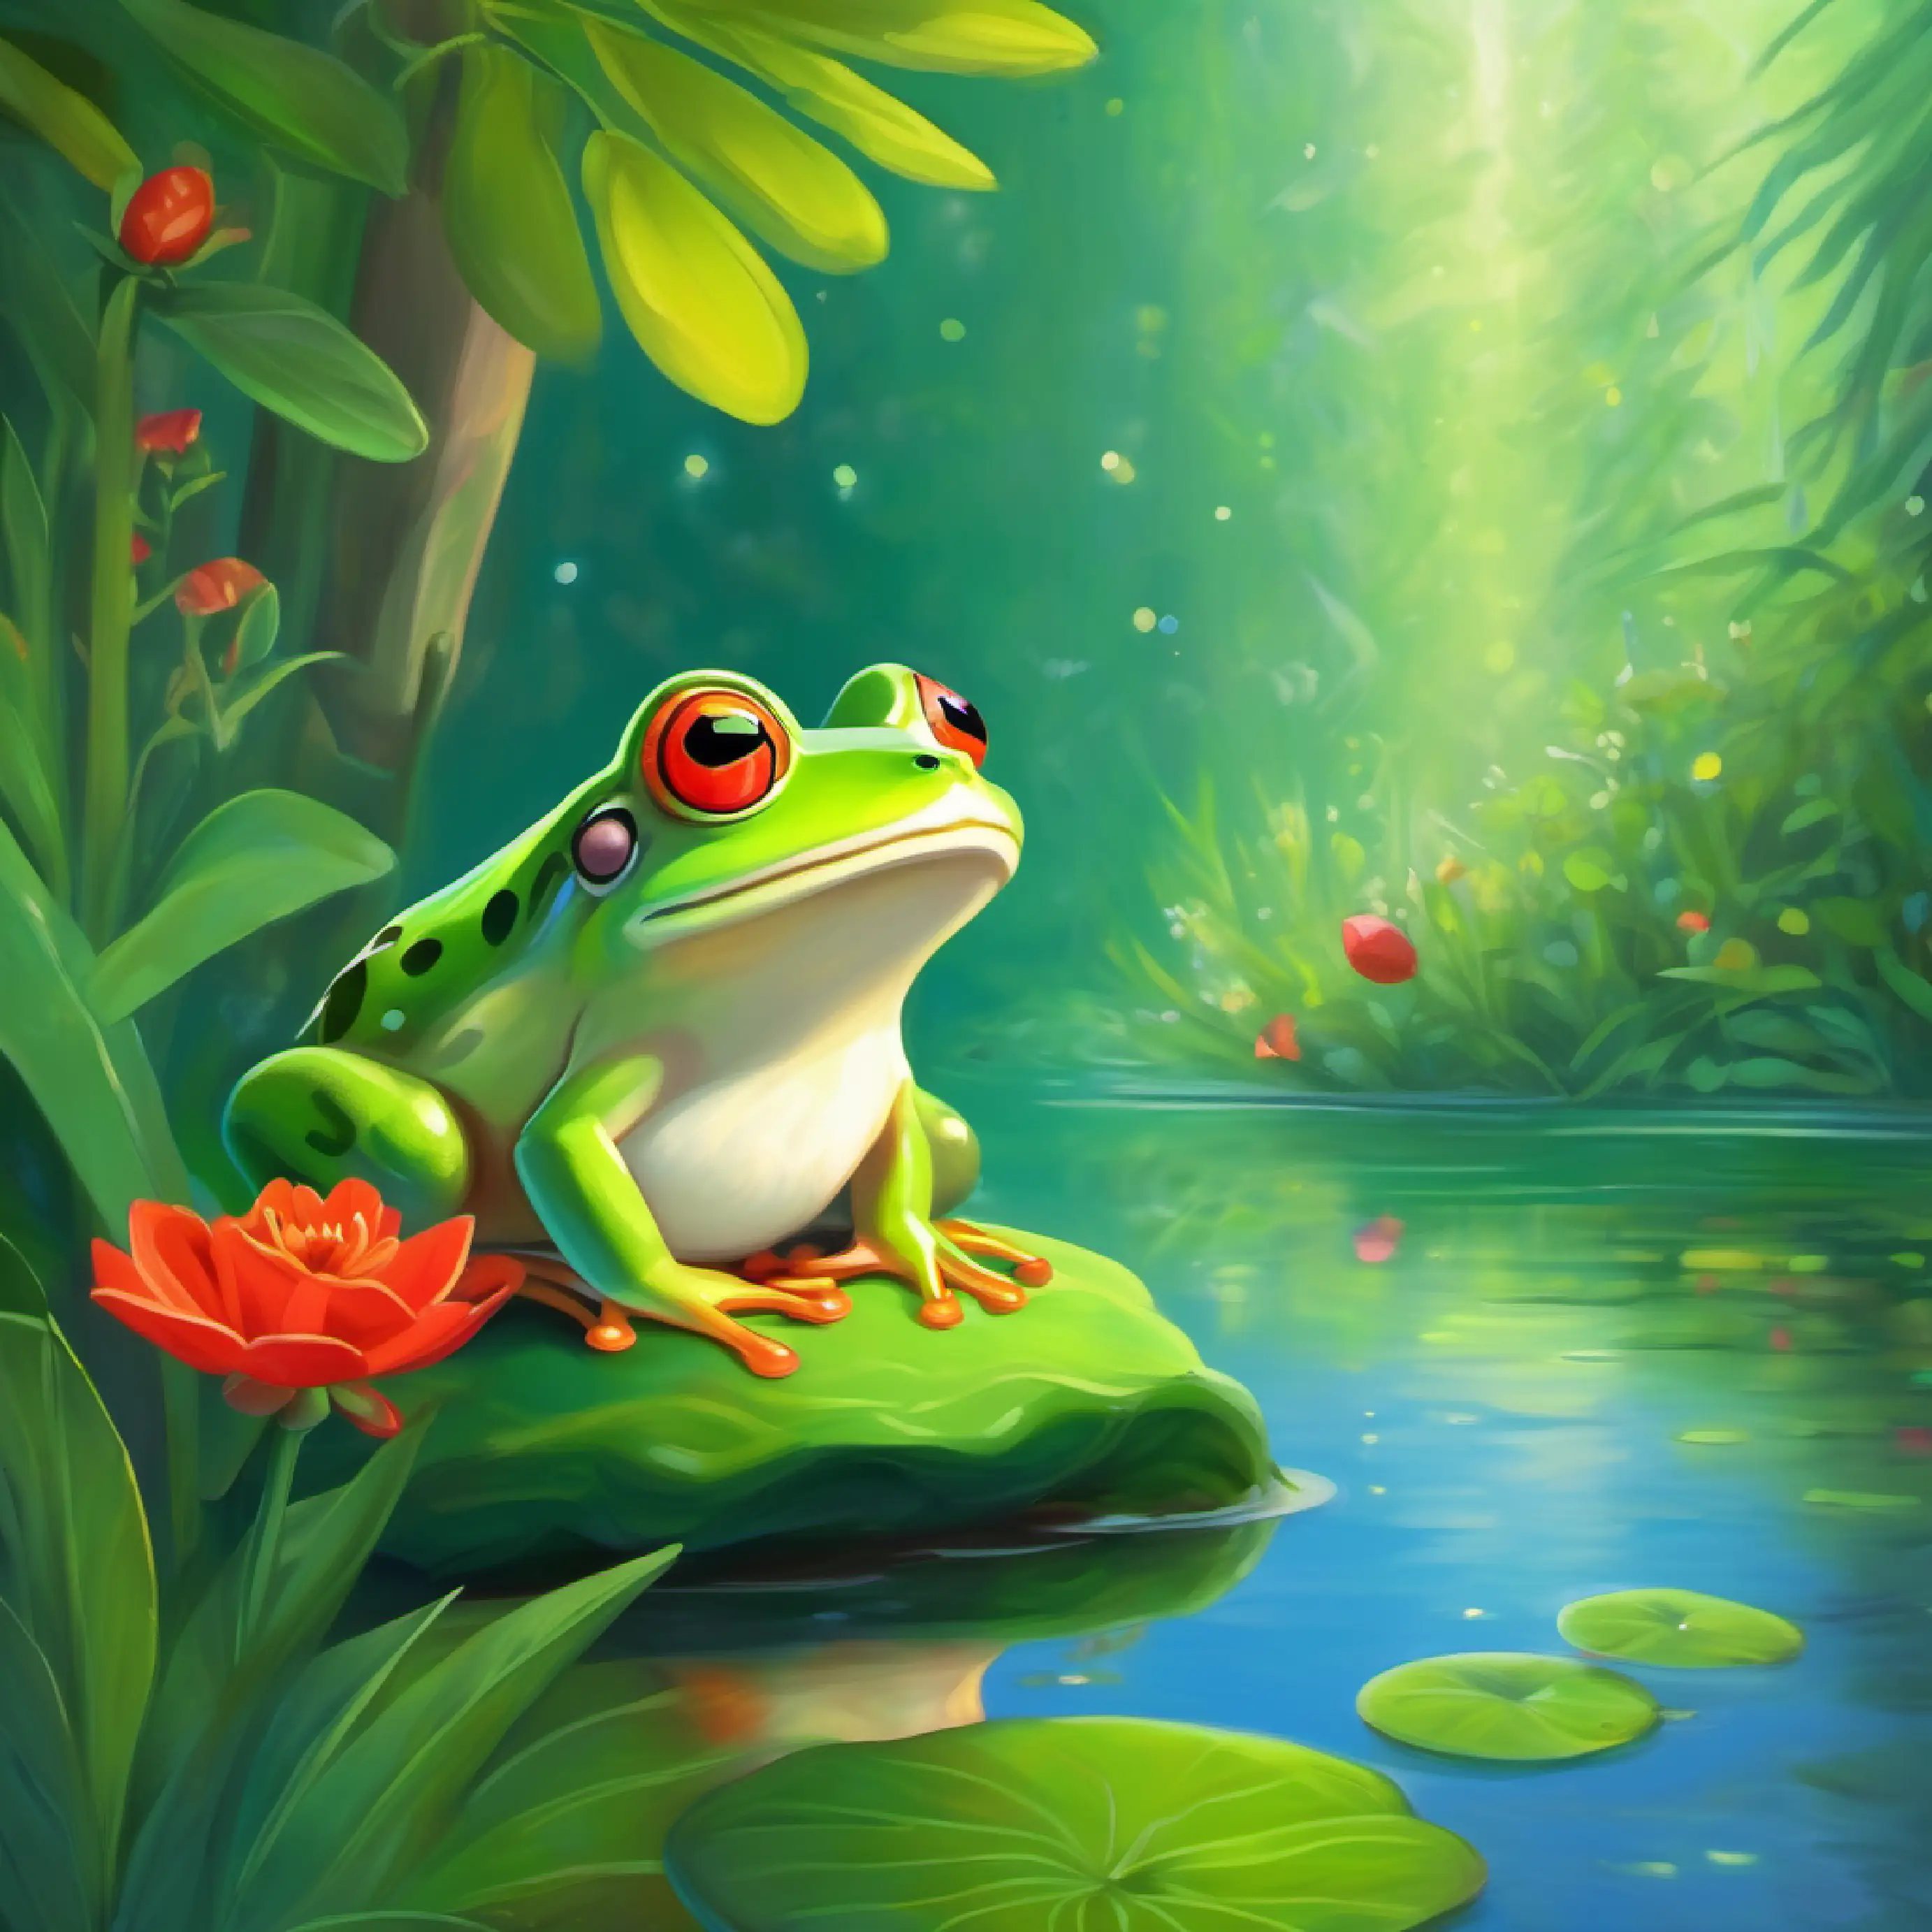 Jumpy visits calm A green frog with a soothing smile and deep, calm eyes, inquires about her serenity.